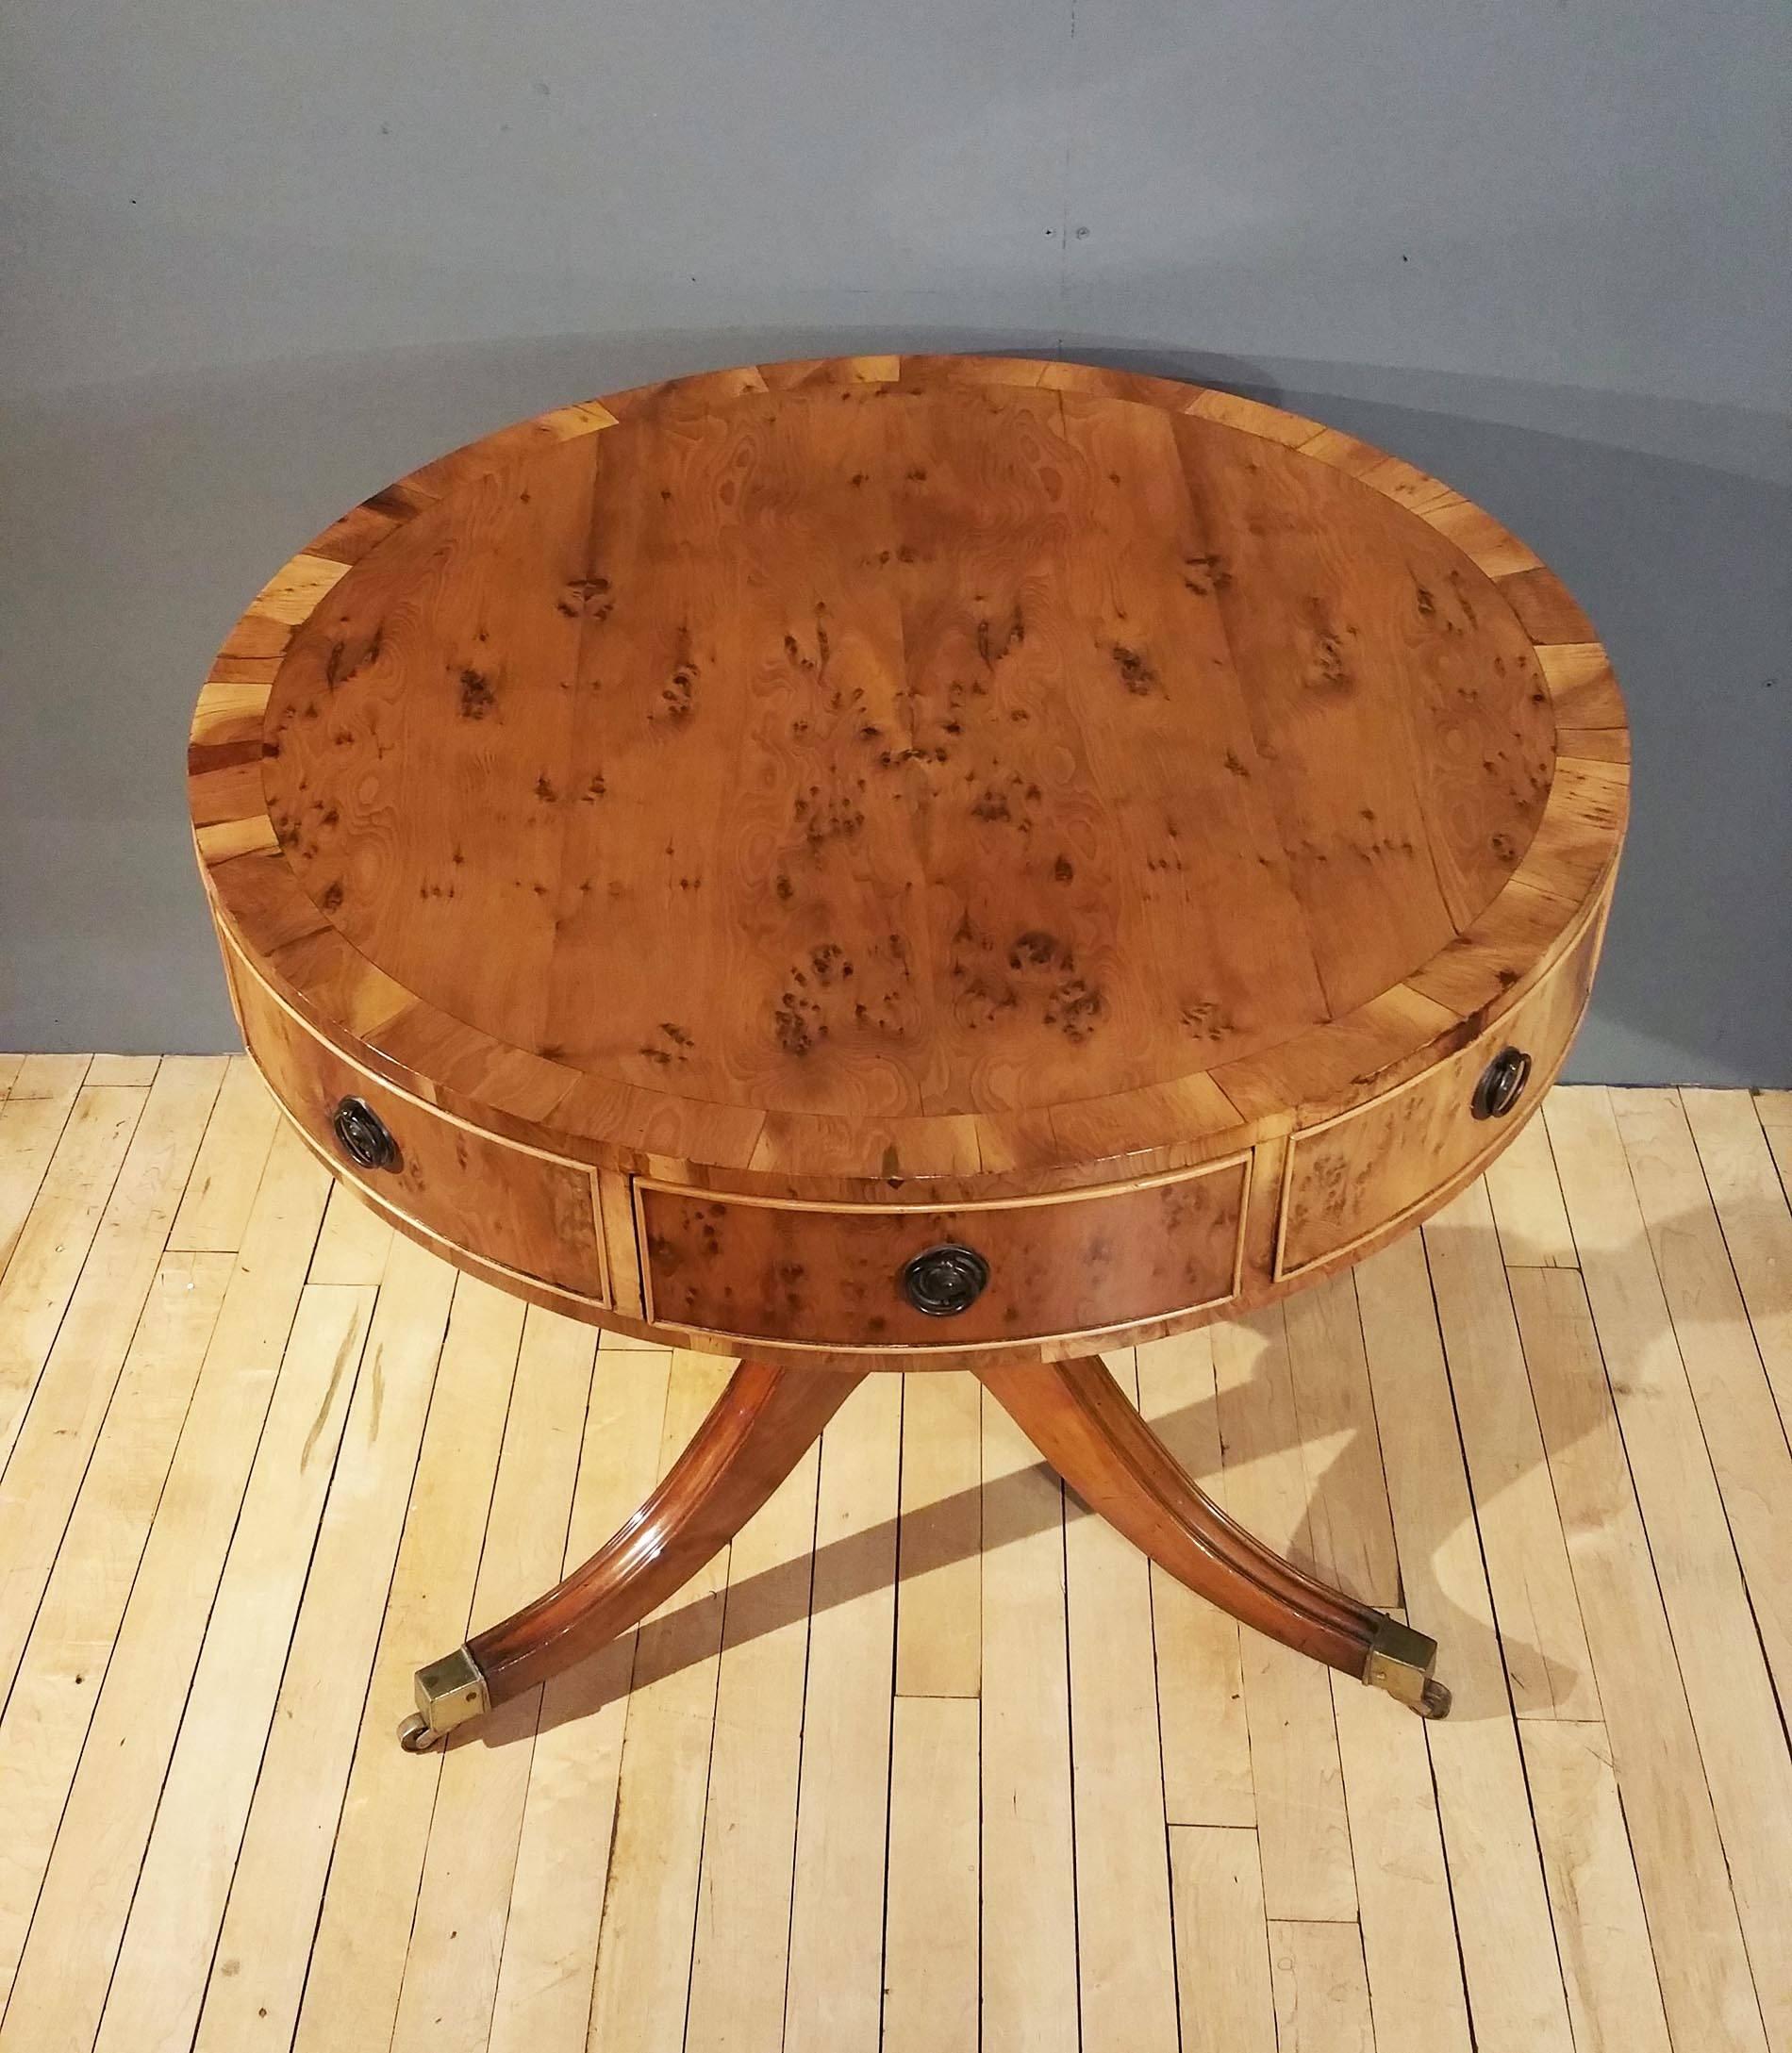 This lovely and fine quality yew wood mid-20th century drum table features alternating four display and four opening drawers on a central tripod base with sweeping splayed legs, finished with squared brass cap feet and castors. The table measures 30